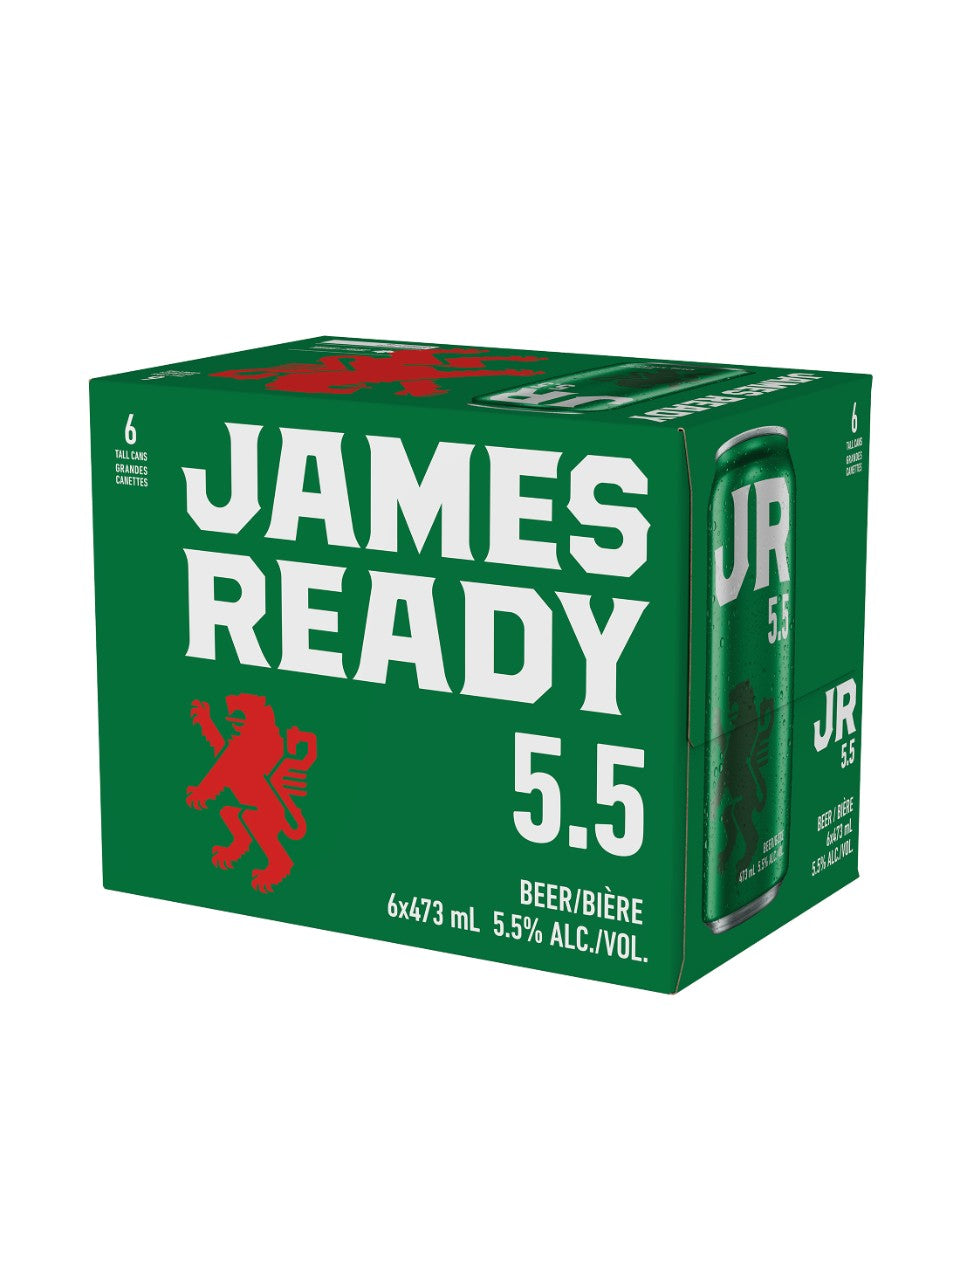 James Ready 5.5 6 x 473 mL can